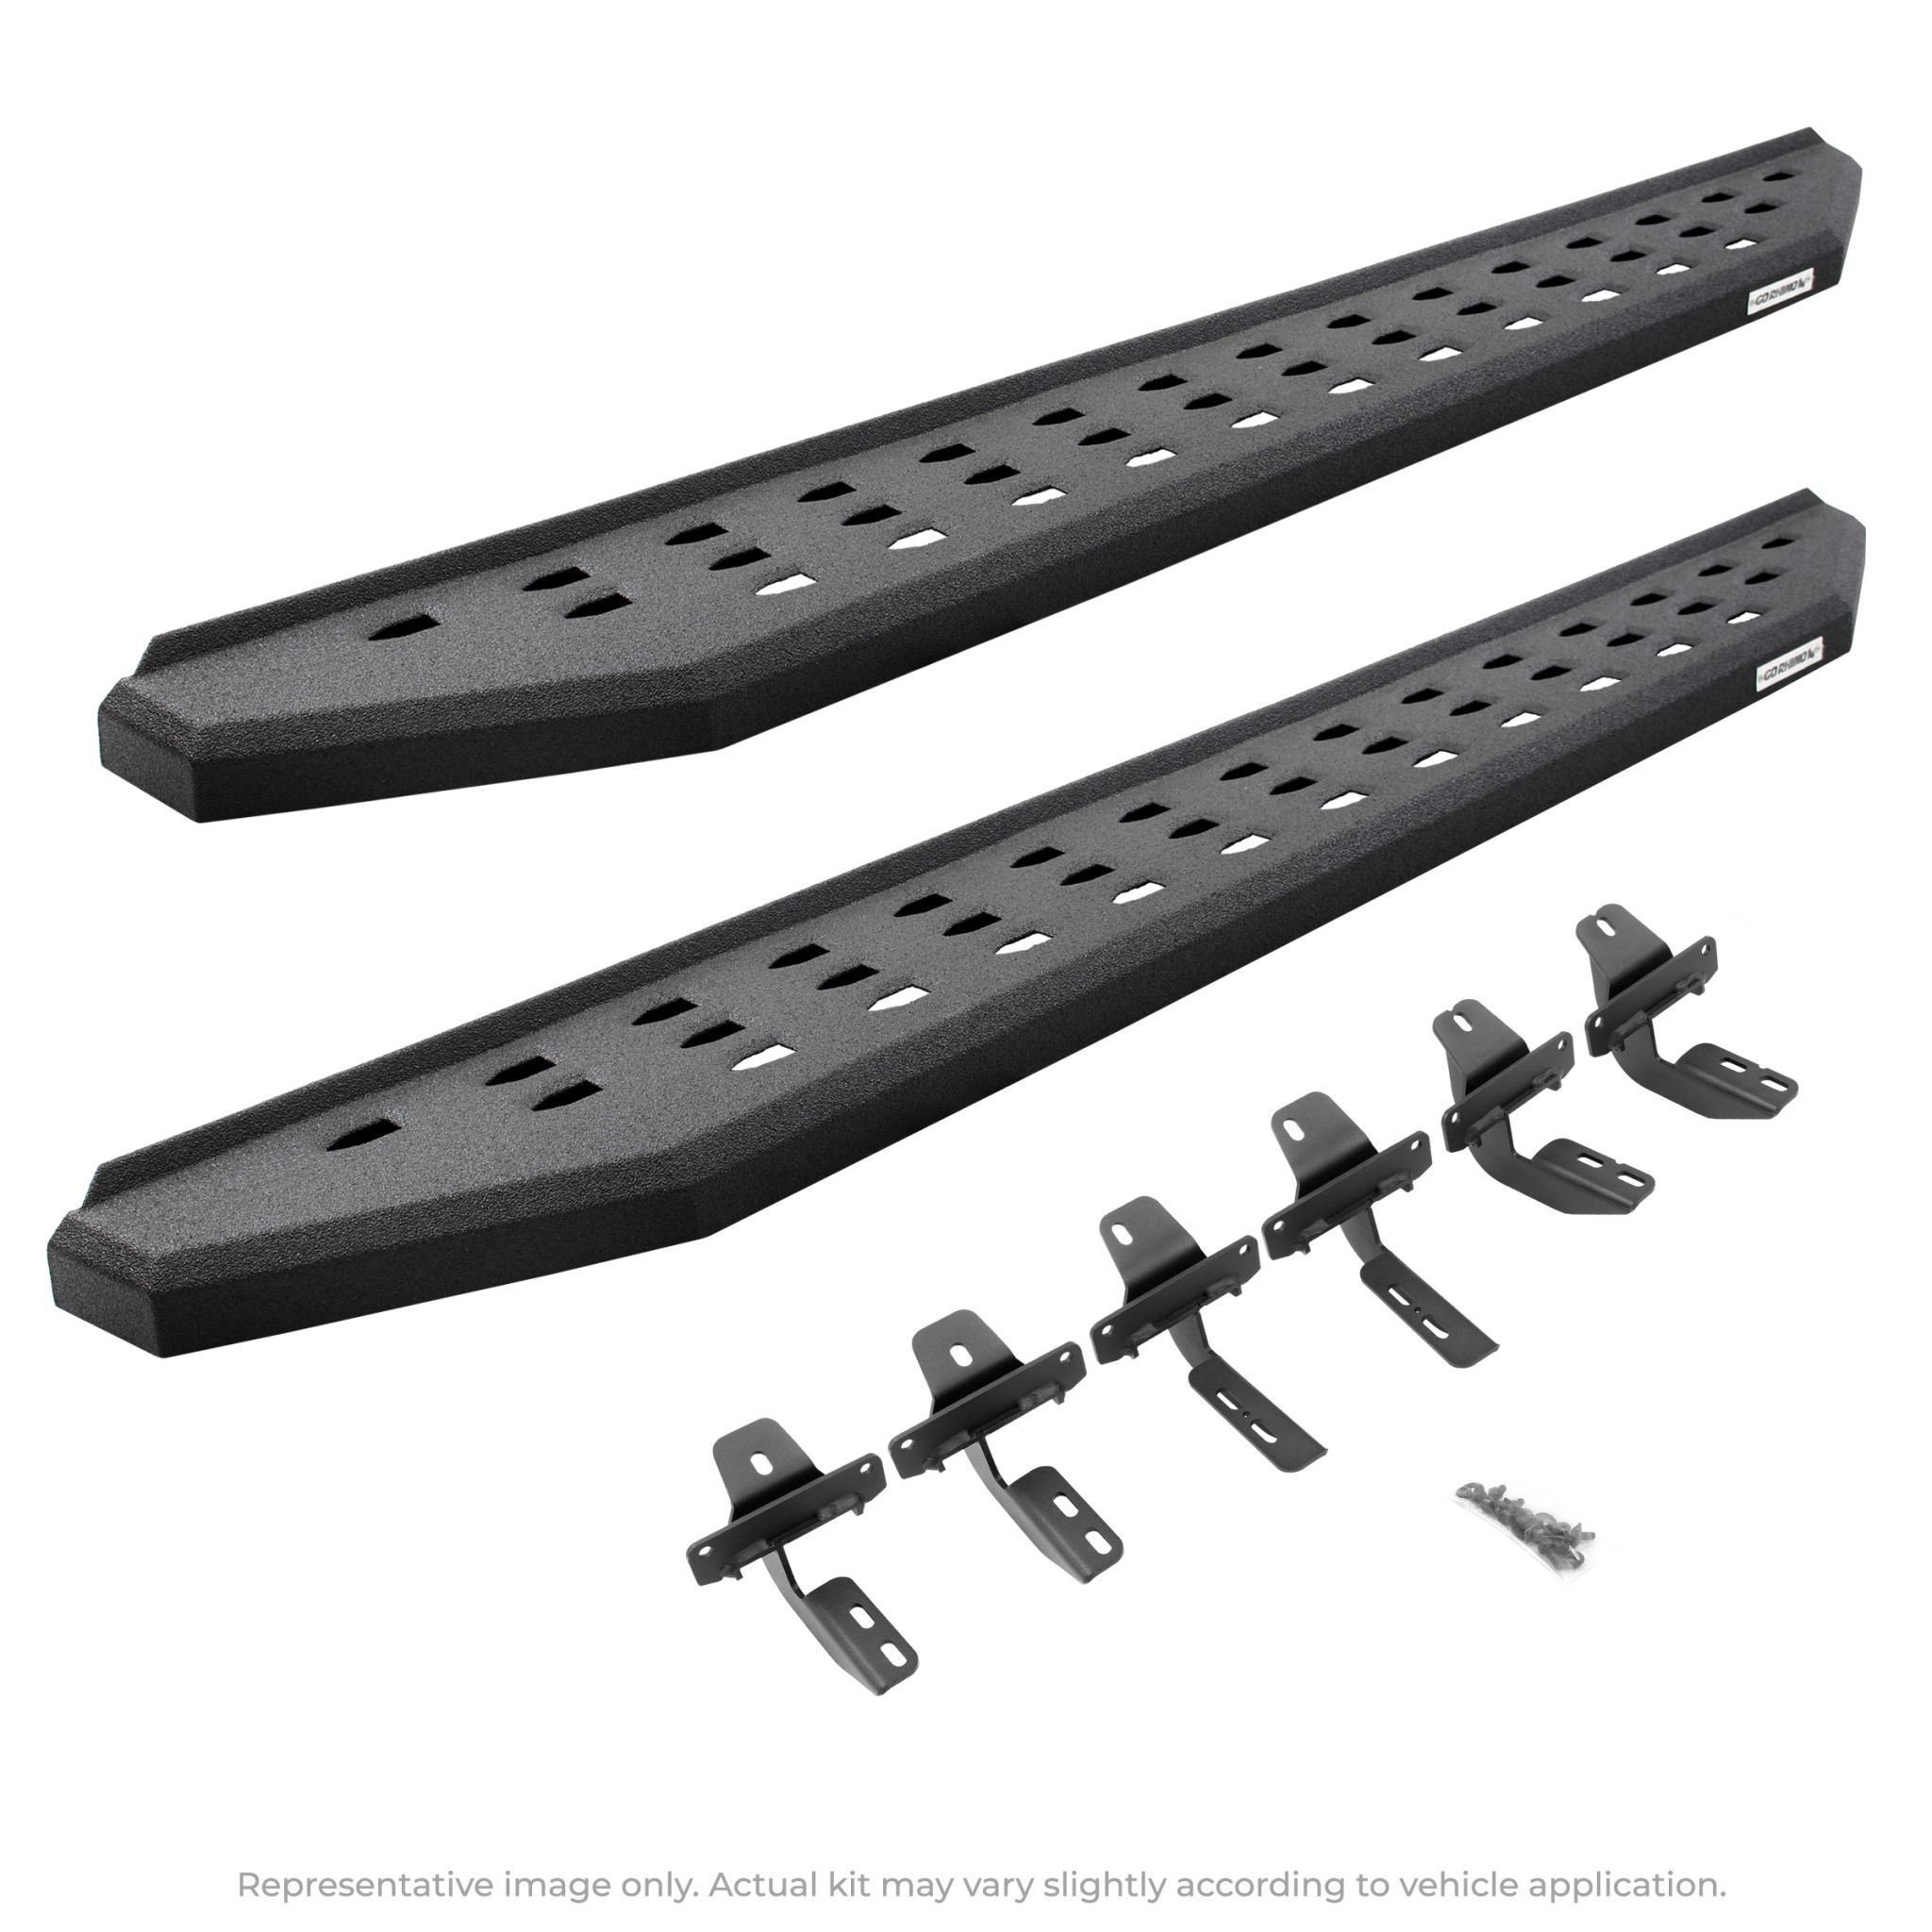 Go Rhino - 69450568T - RB20 Running Boards With Mounting Brackets - Protective Bedliner Coating